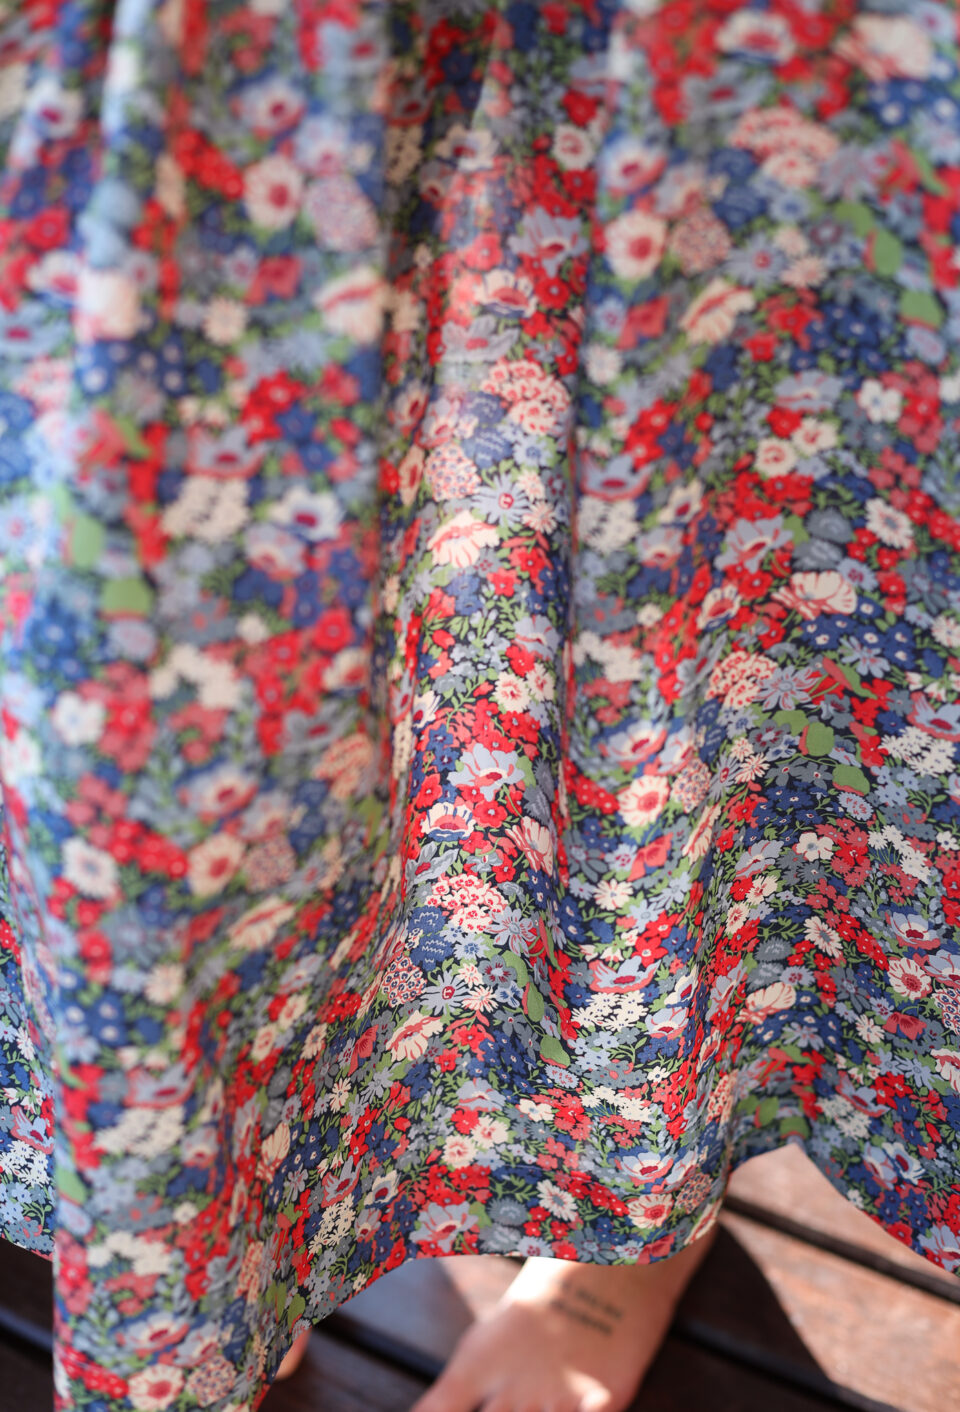 Floral Print Long Sleeve Dress in Tana Lawn Cotton/liberty of London Cotton  Dress /OFFON CLOTHING 